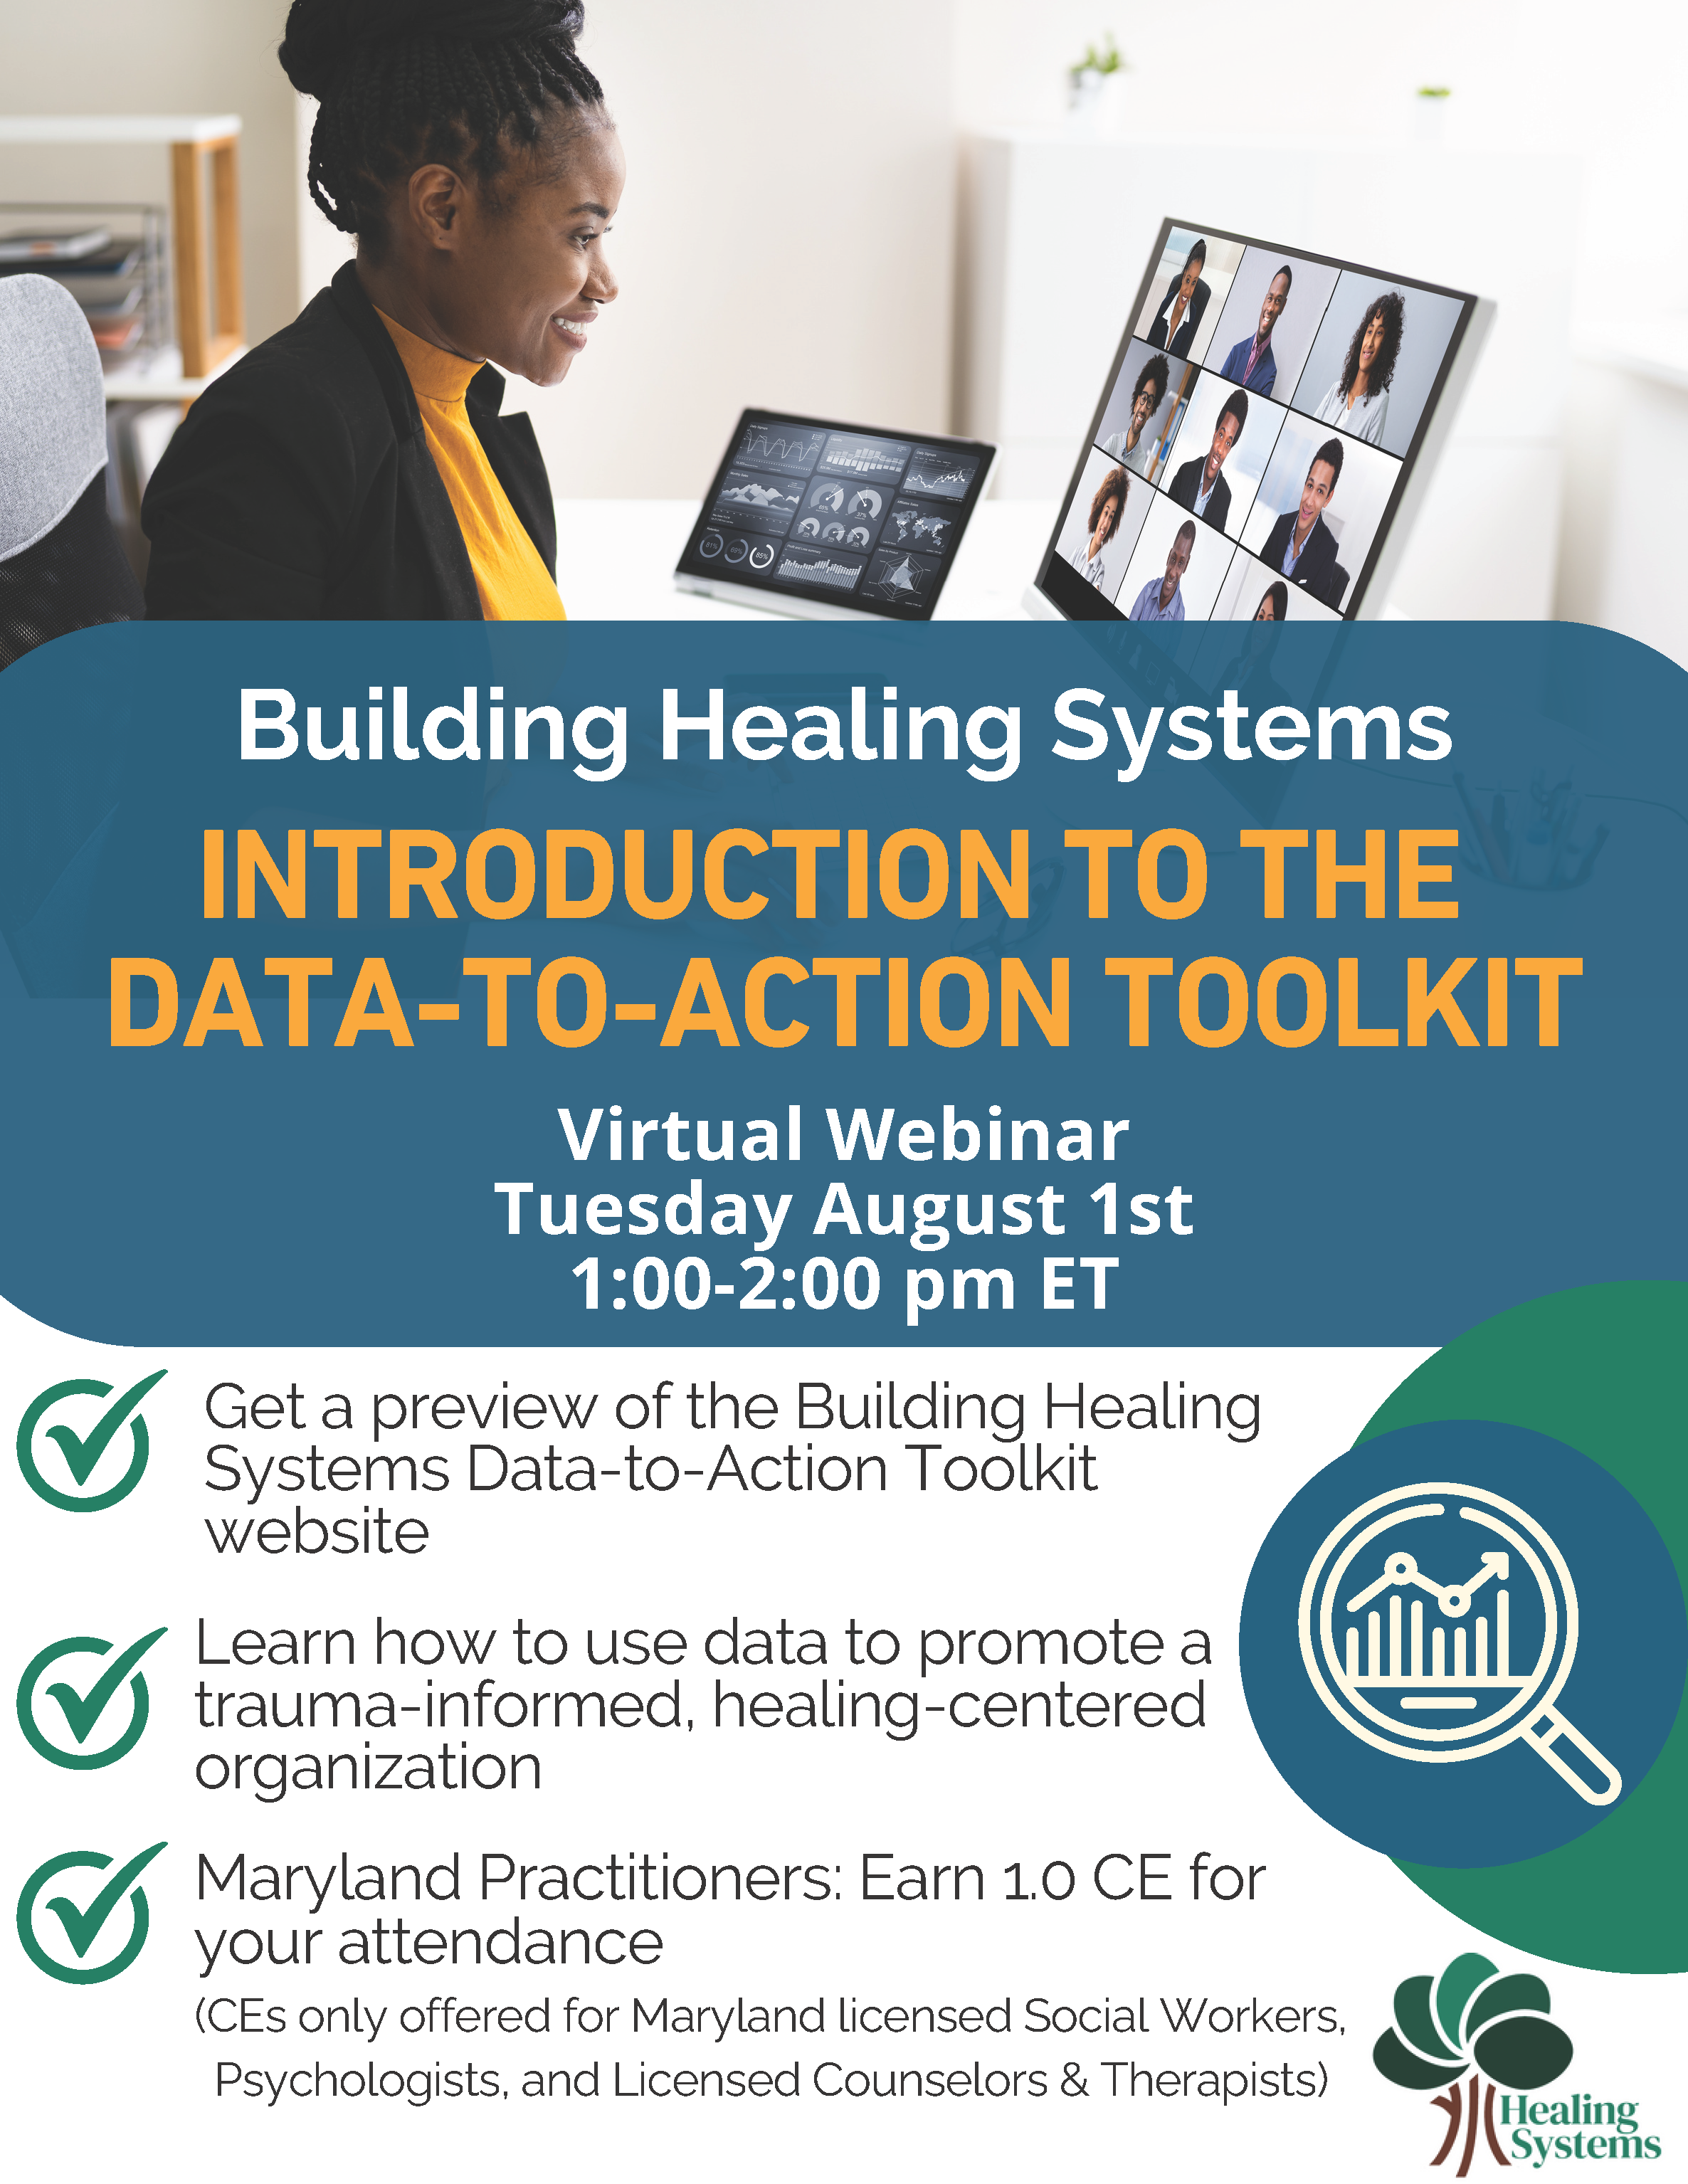 Building Healing Systems Introduction to the Data-to-Action Toolkit Virtual Webinar Tuesday August 1st 1-2pm ET. Get a preview of the Building Healing Systems Data-to-Action Toolkit website. Learn how to use data to promote a trauma-informed healing-centered organization. Maryland Practitioners: Earn 1.0 CE for your attendance (for Maryland licensed Social Workers, Psychologists, Therapists).